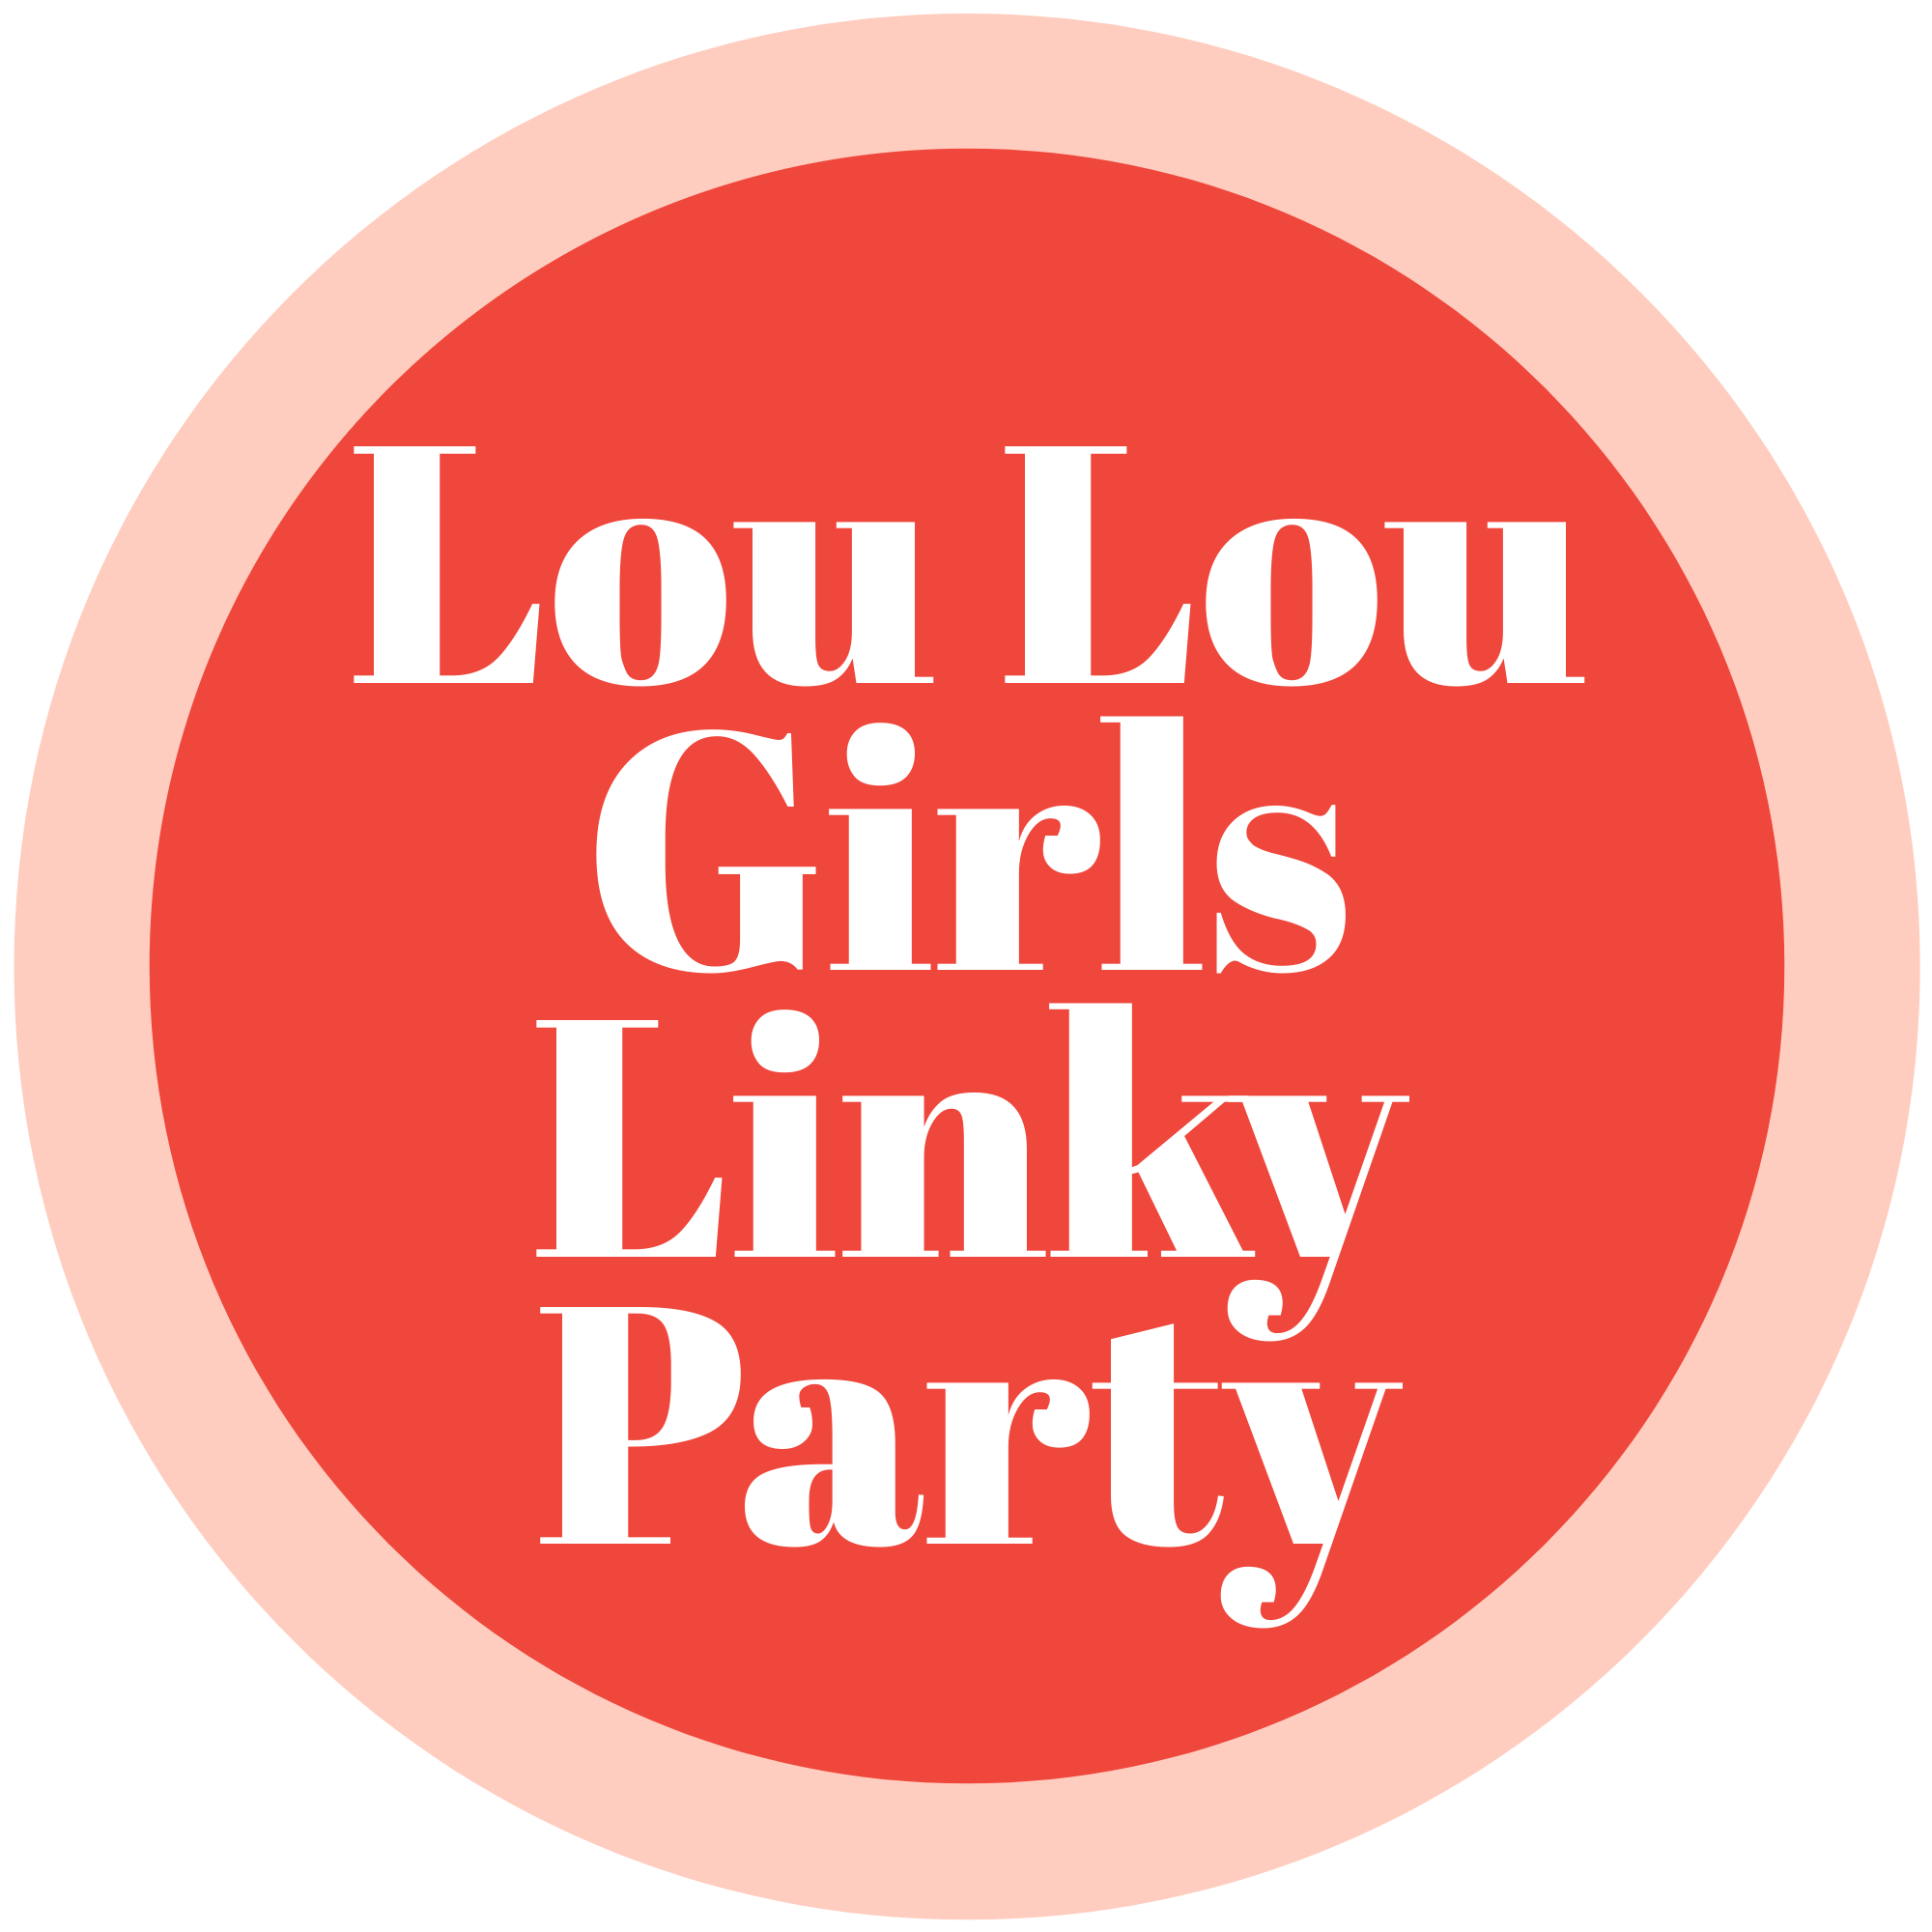 Lou Lou Girls Fabulous Party 491 #linkyparty #bloghop #linkyparties